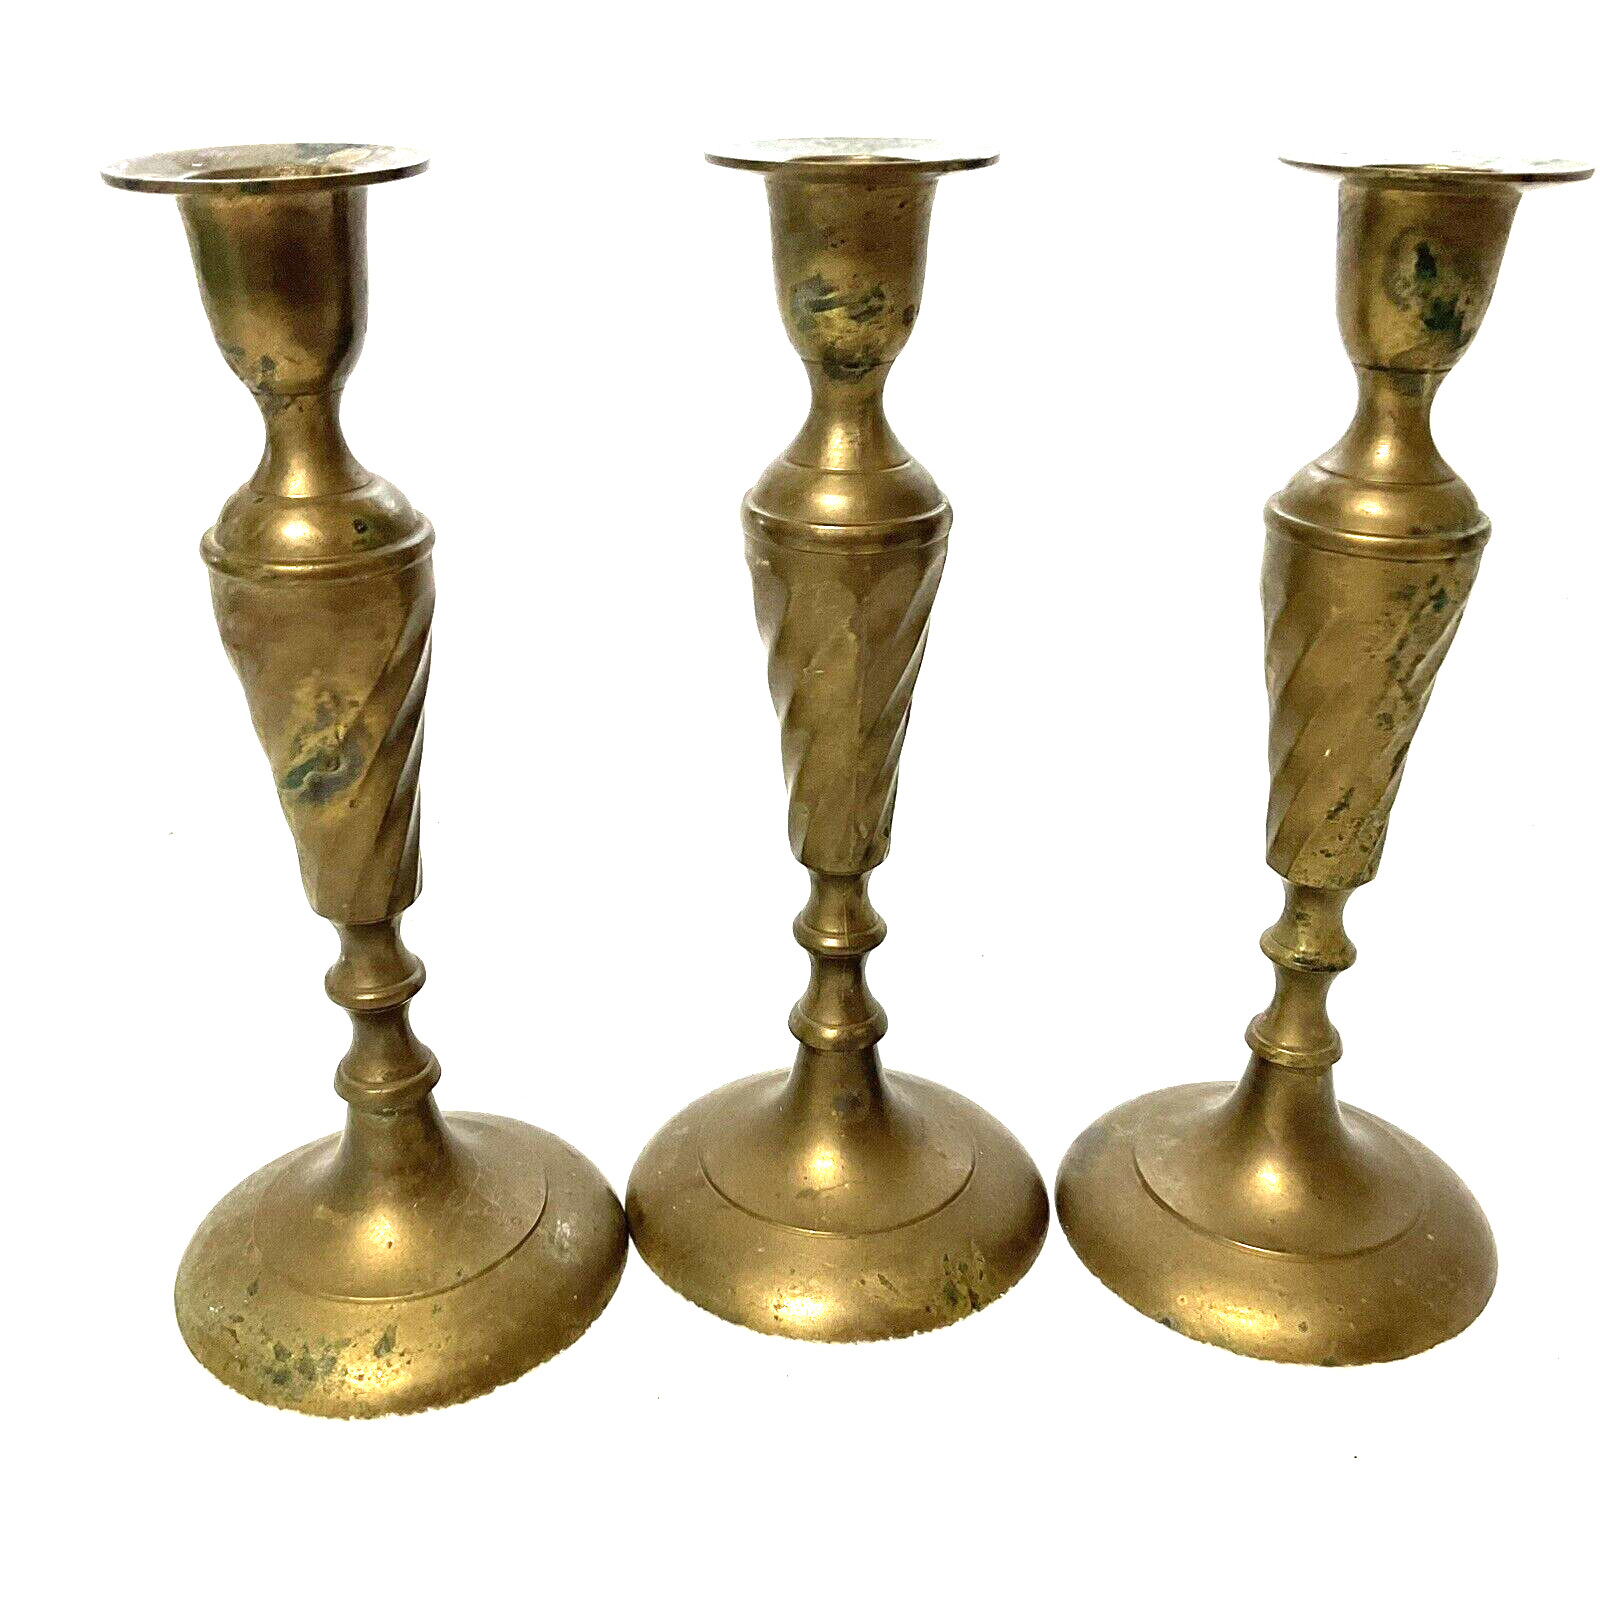 Vintage Brass Swirl Candlesticks Holders Lot of 3 Made in India